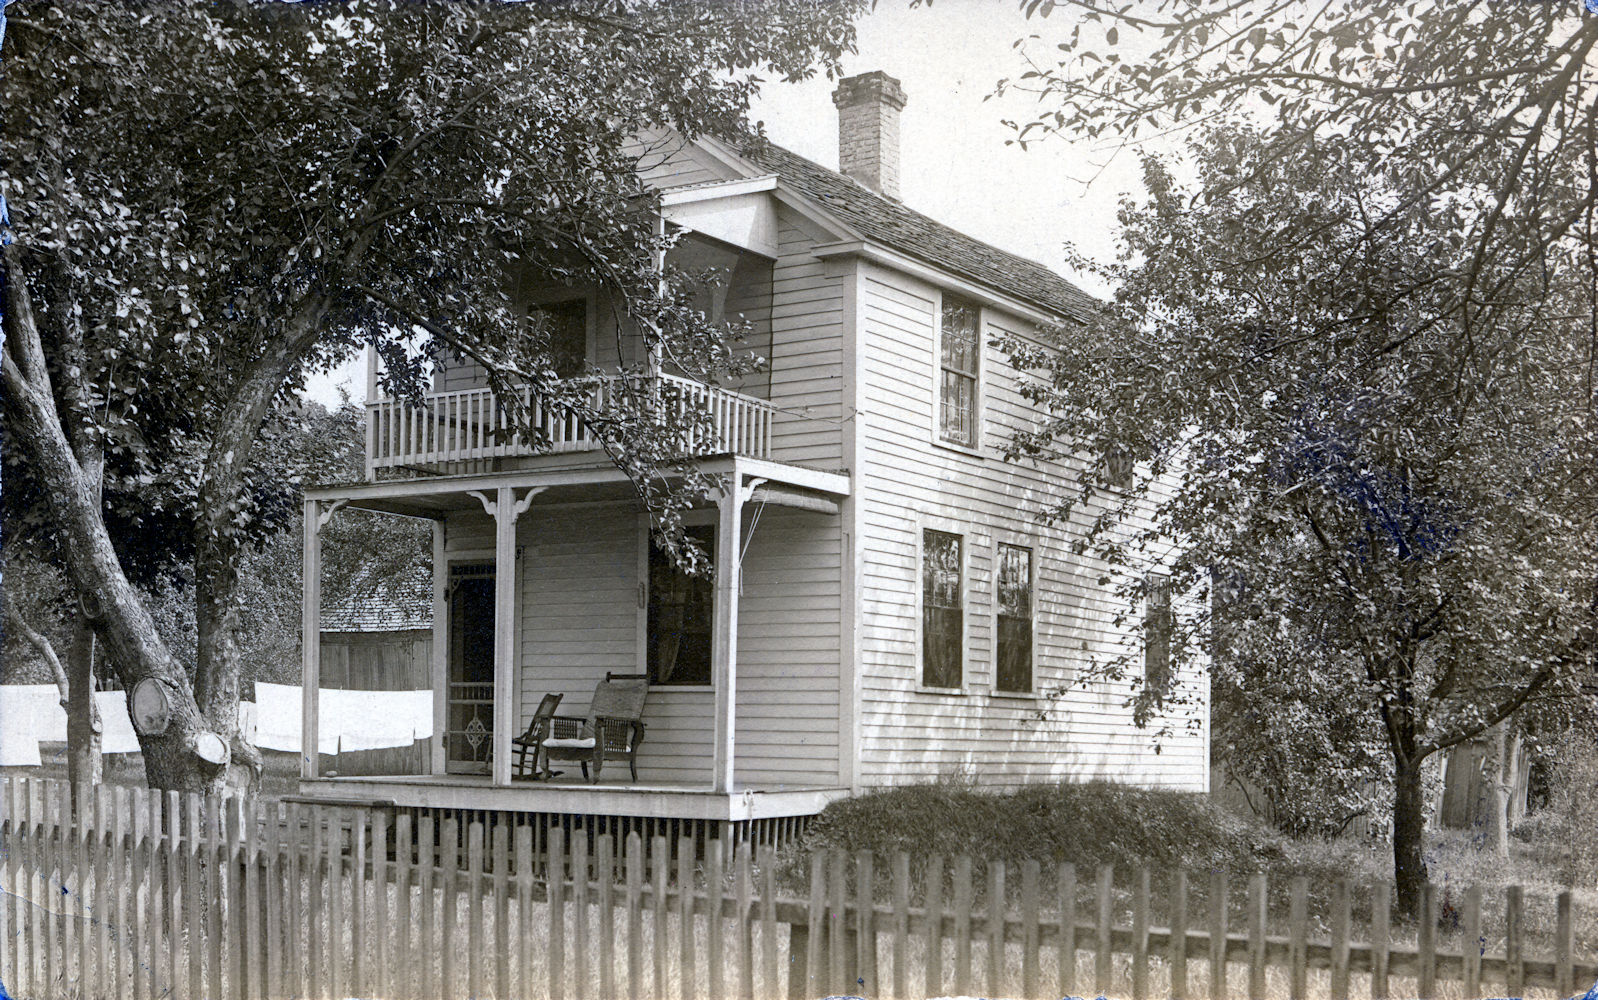 Unknown rural house with Morris chair on porch